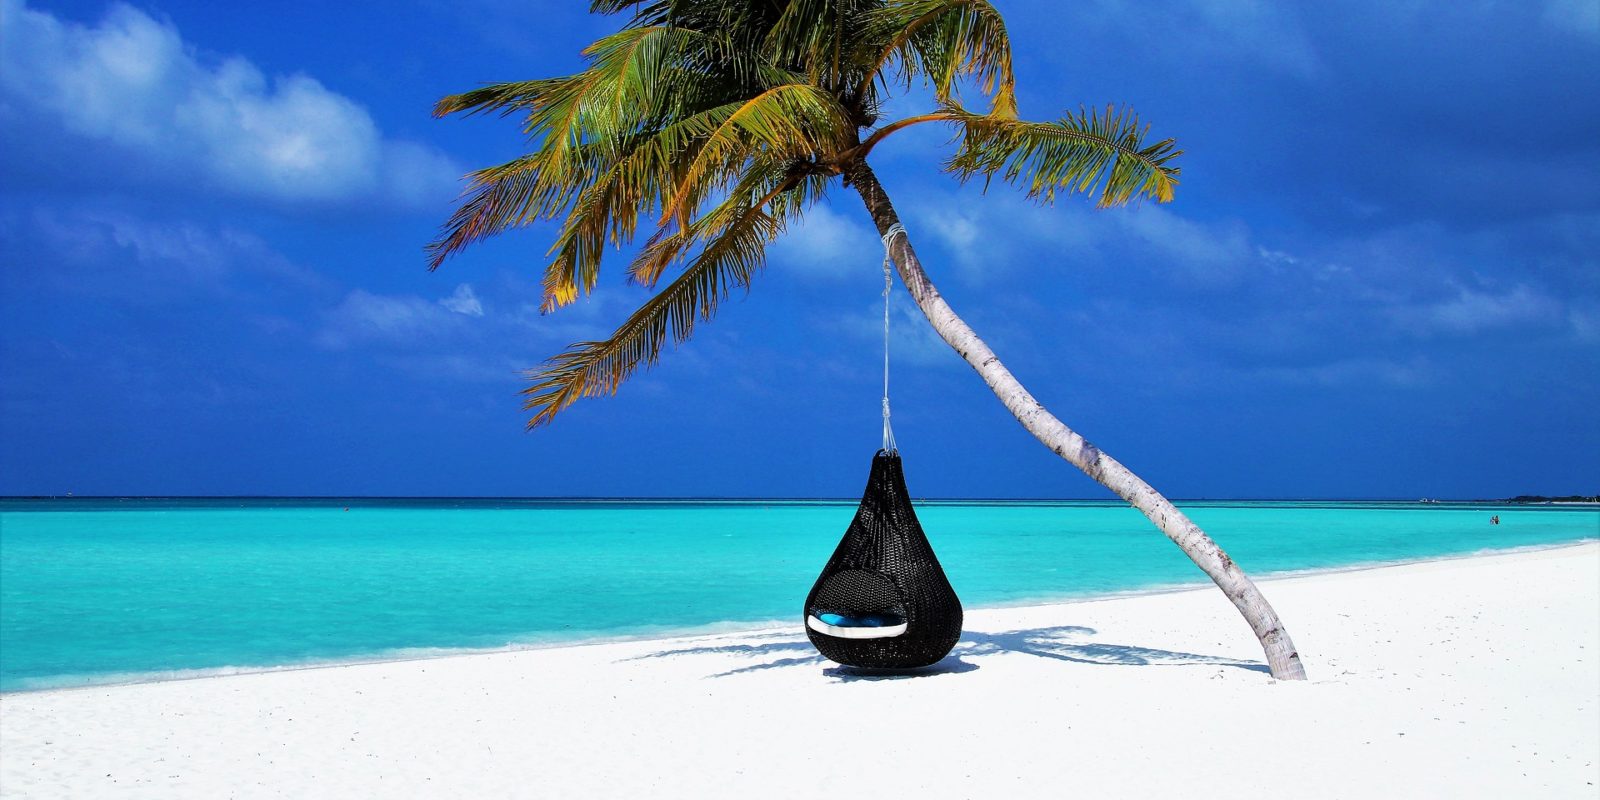 Resting by the beach, Maldives.